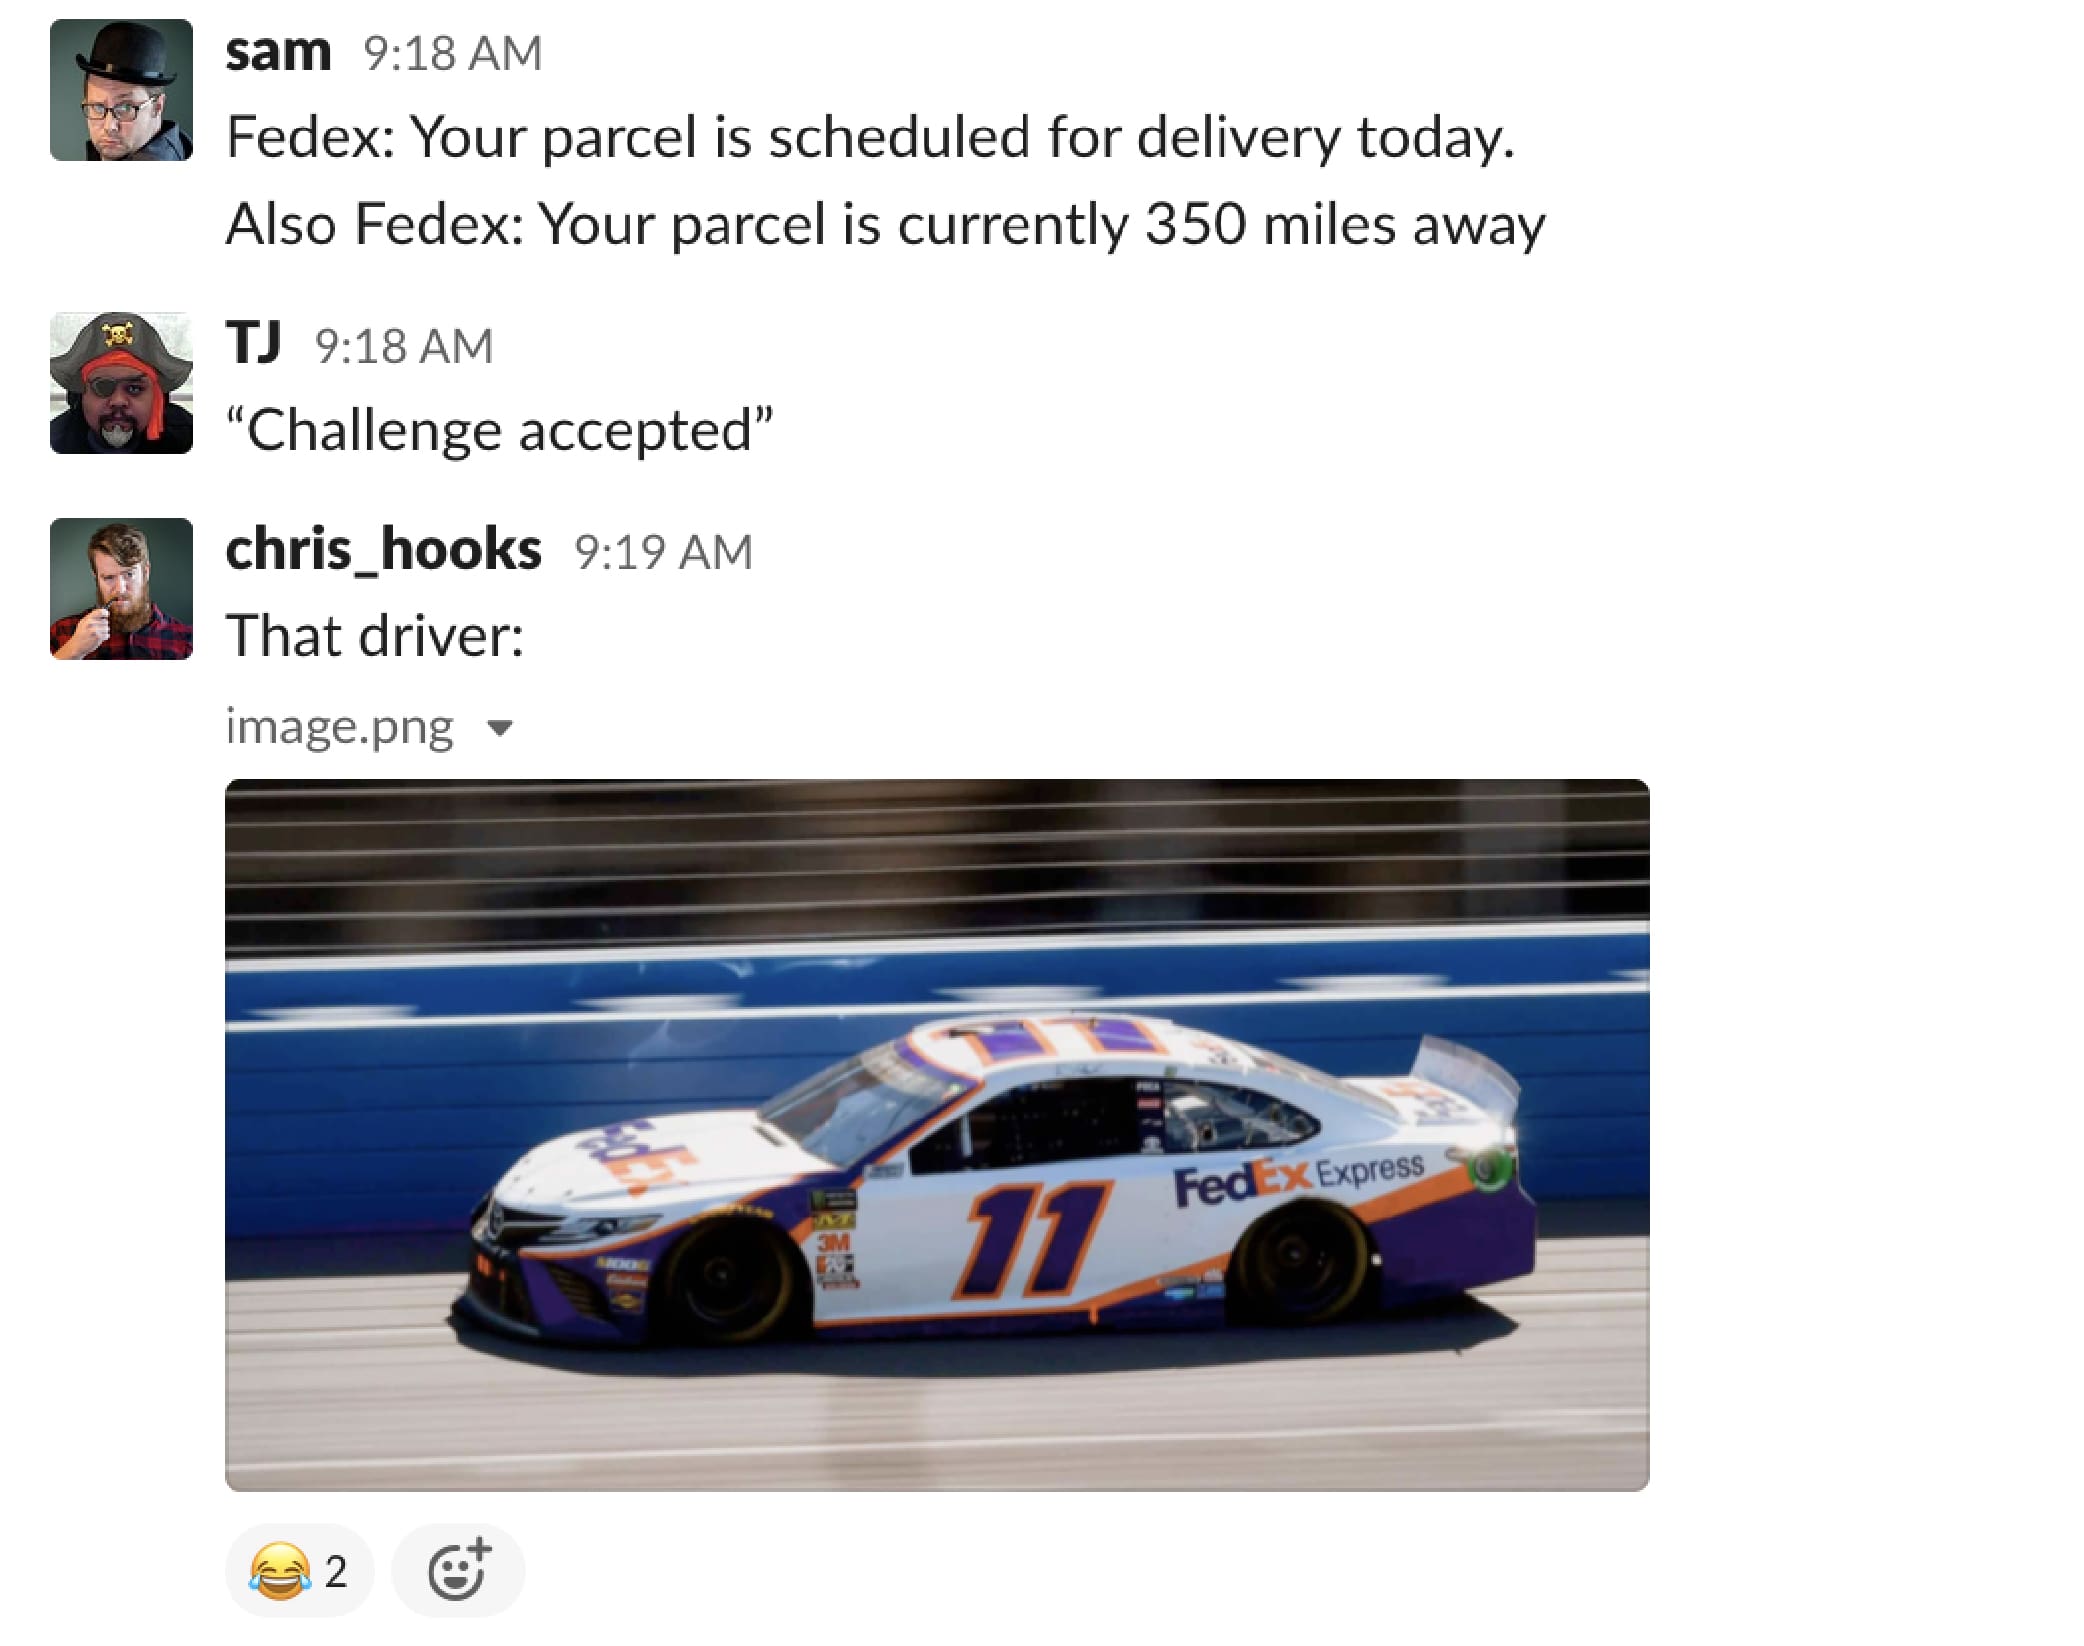 Fedex delivery